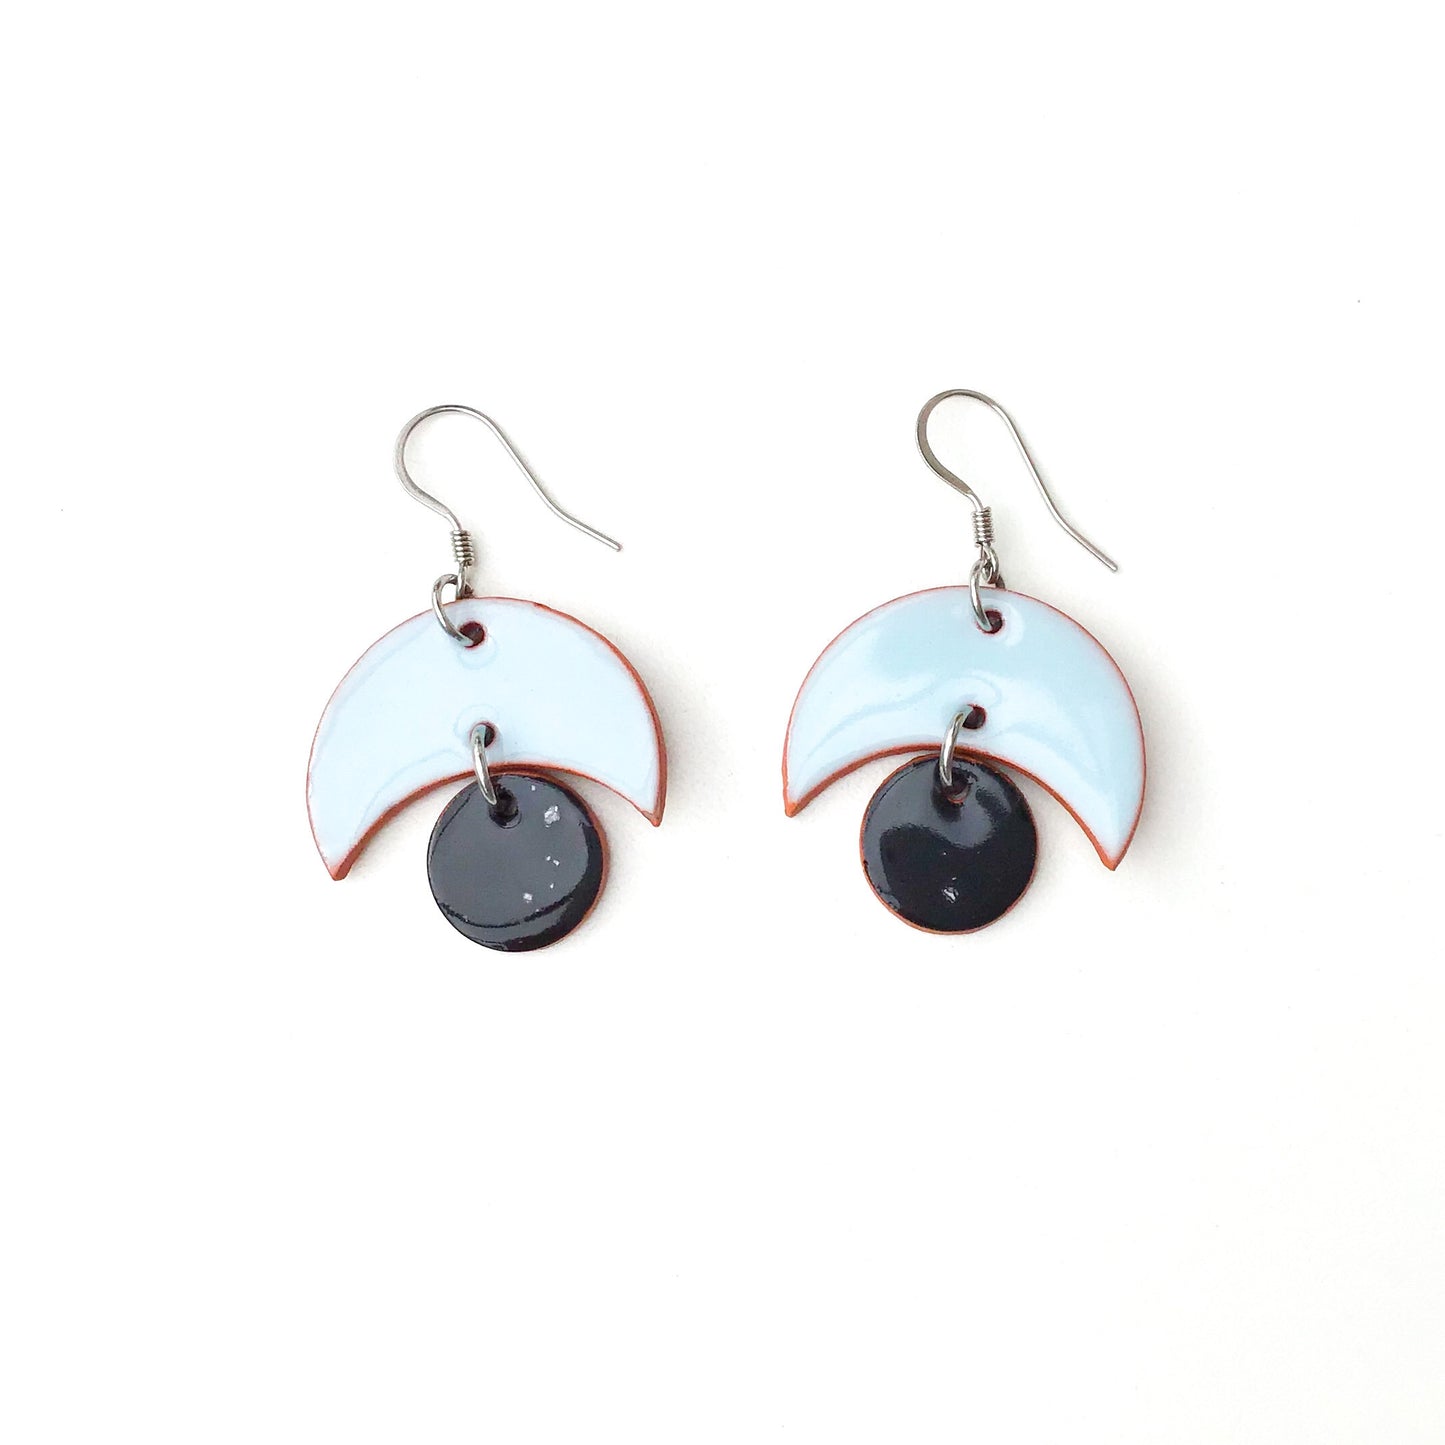 Small Crescent and Circle Earrings: Ceramic Earrings in Sky Blue and Black